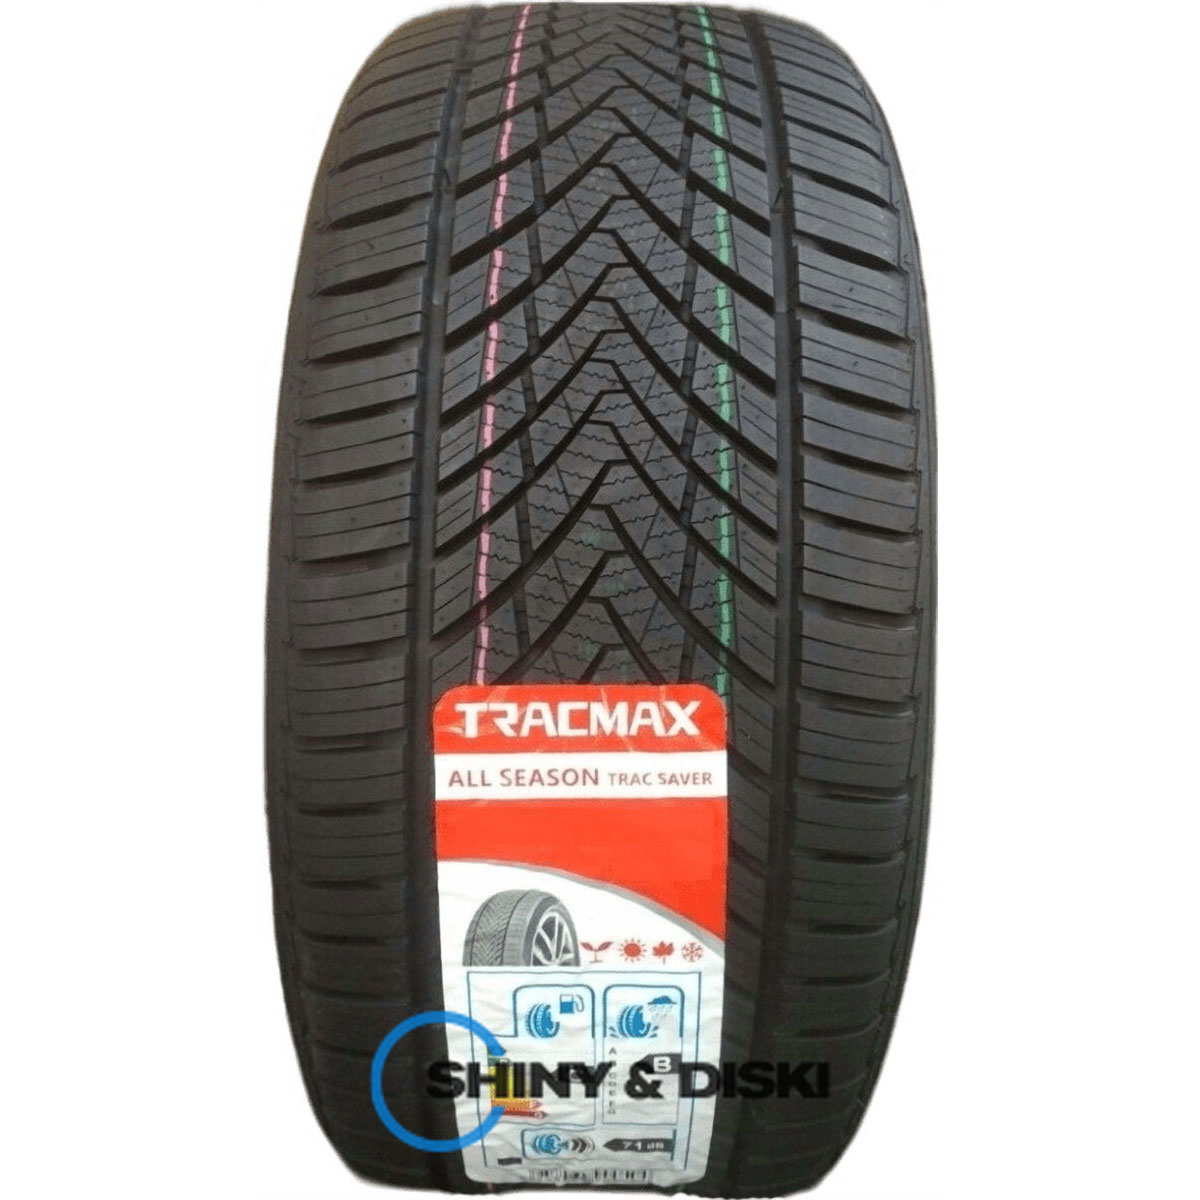 покрышки tracmax a/s trac saver 215/65 r15 96h